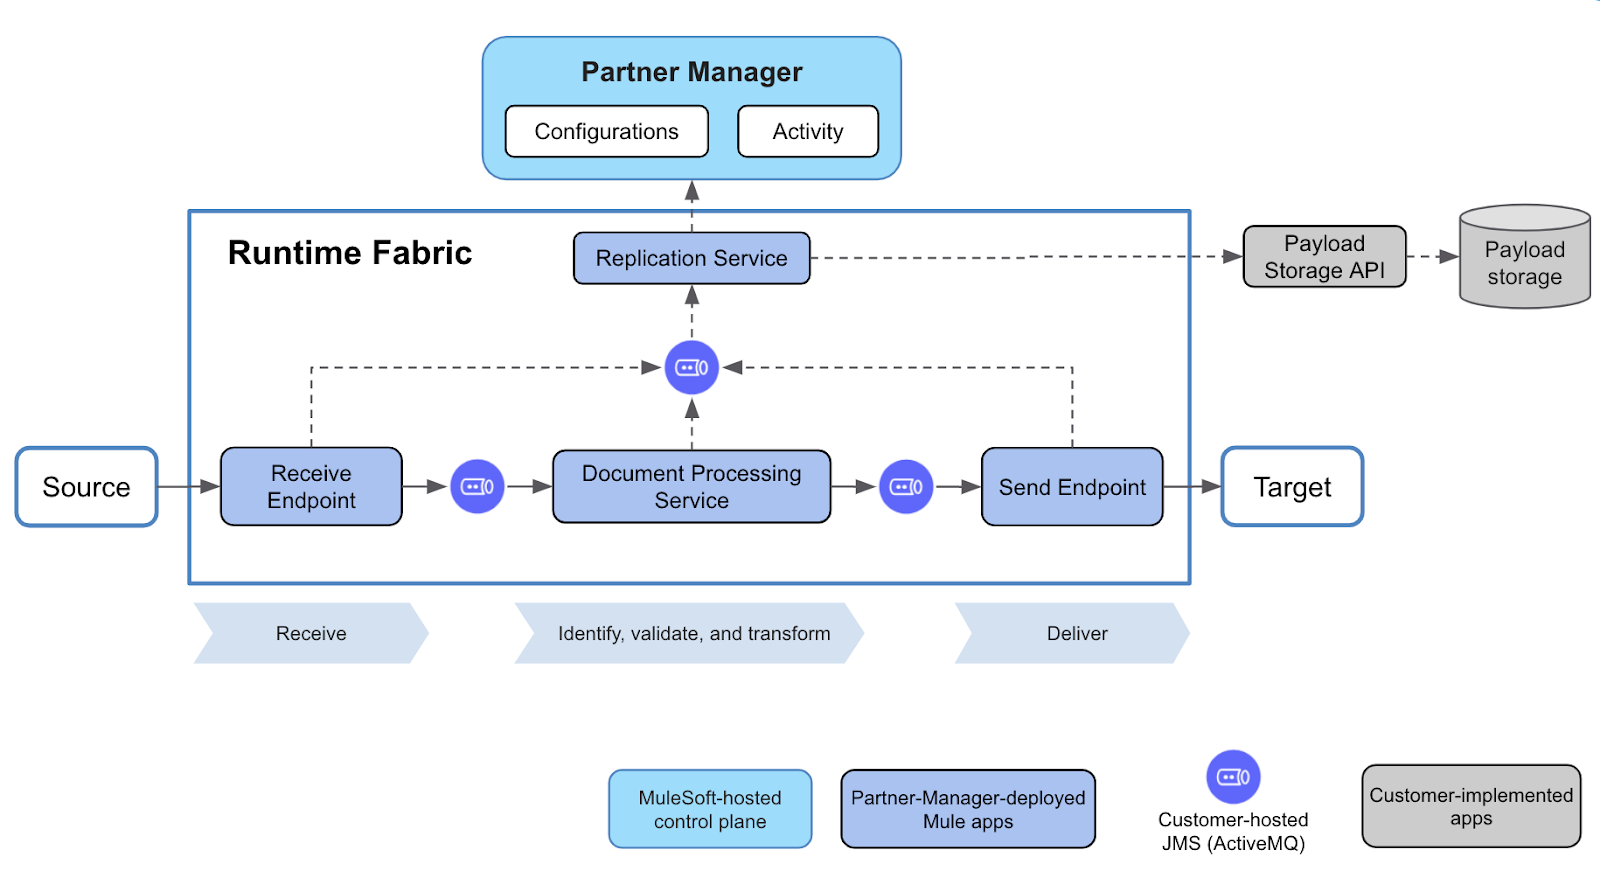 Partner Manager in Runtime Fabric